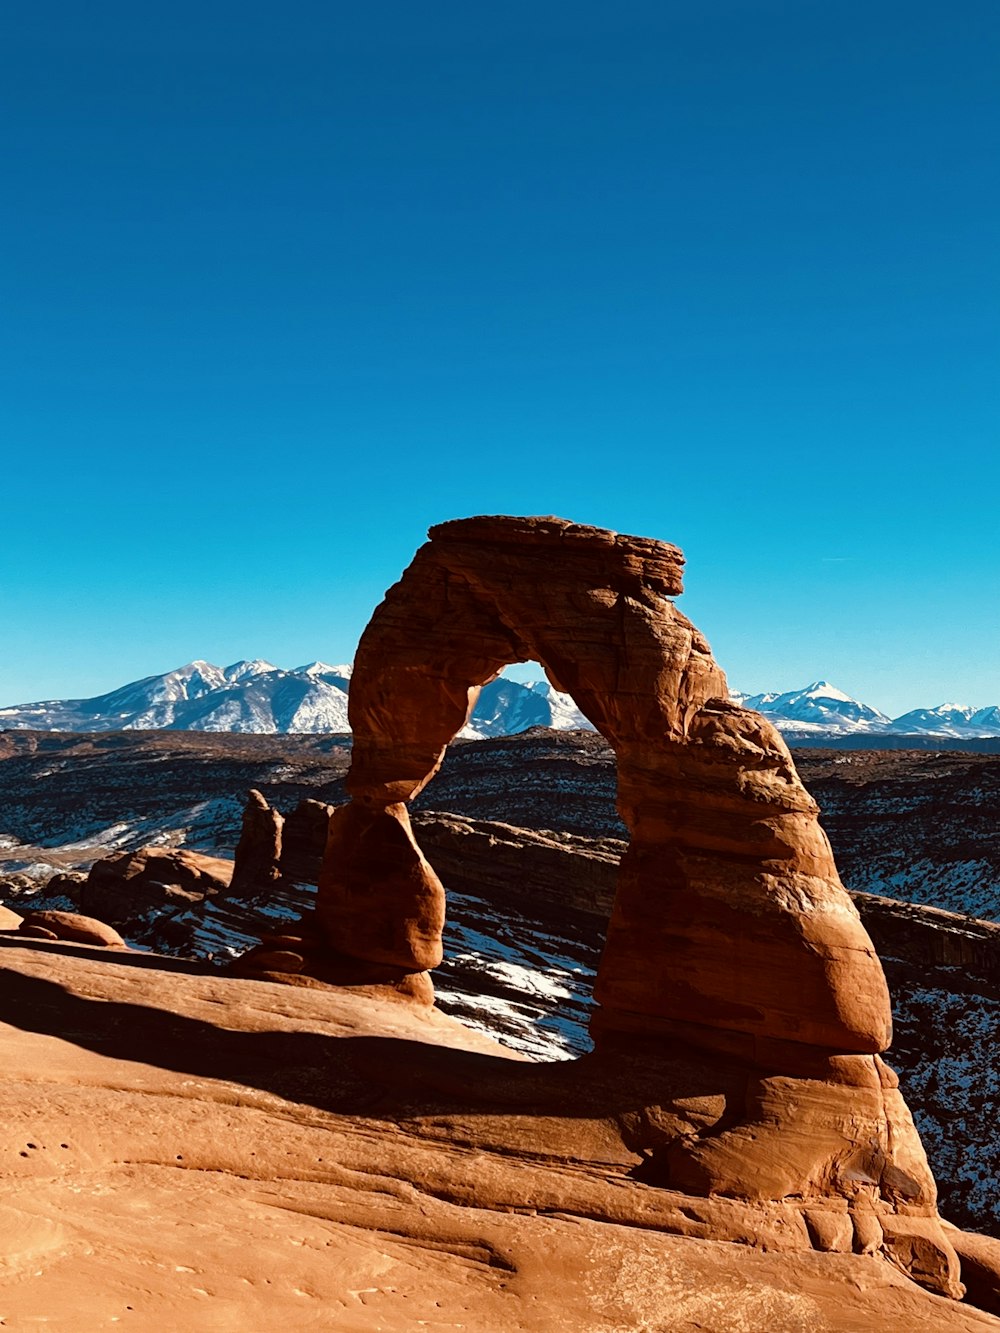 a large rock formation in the desert with Arches National Park in the background